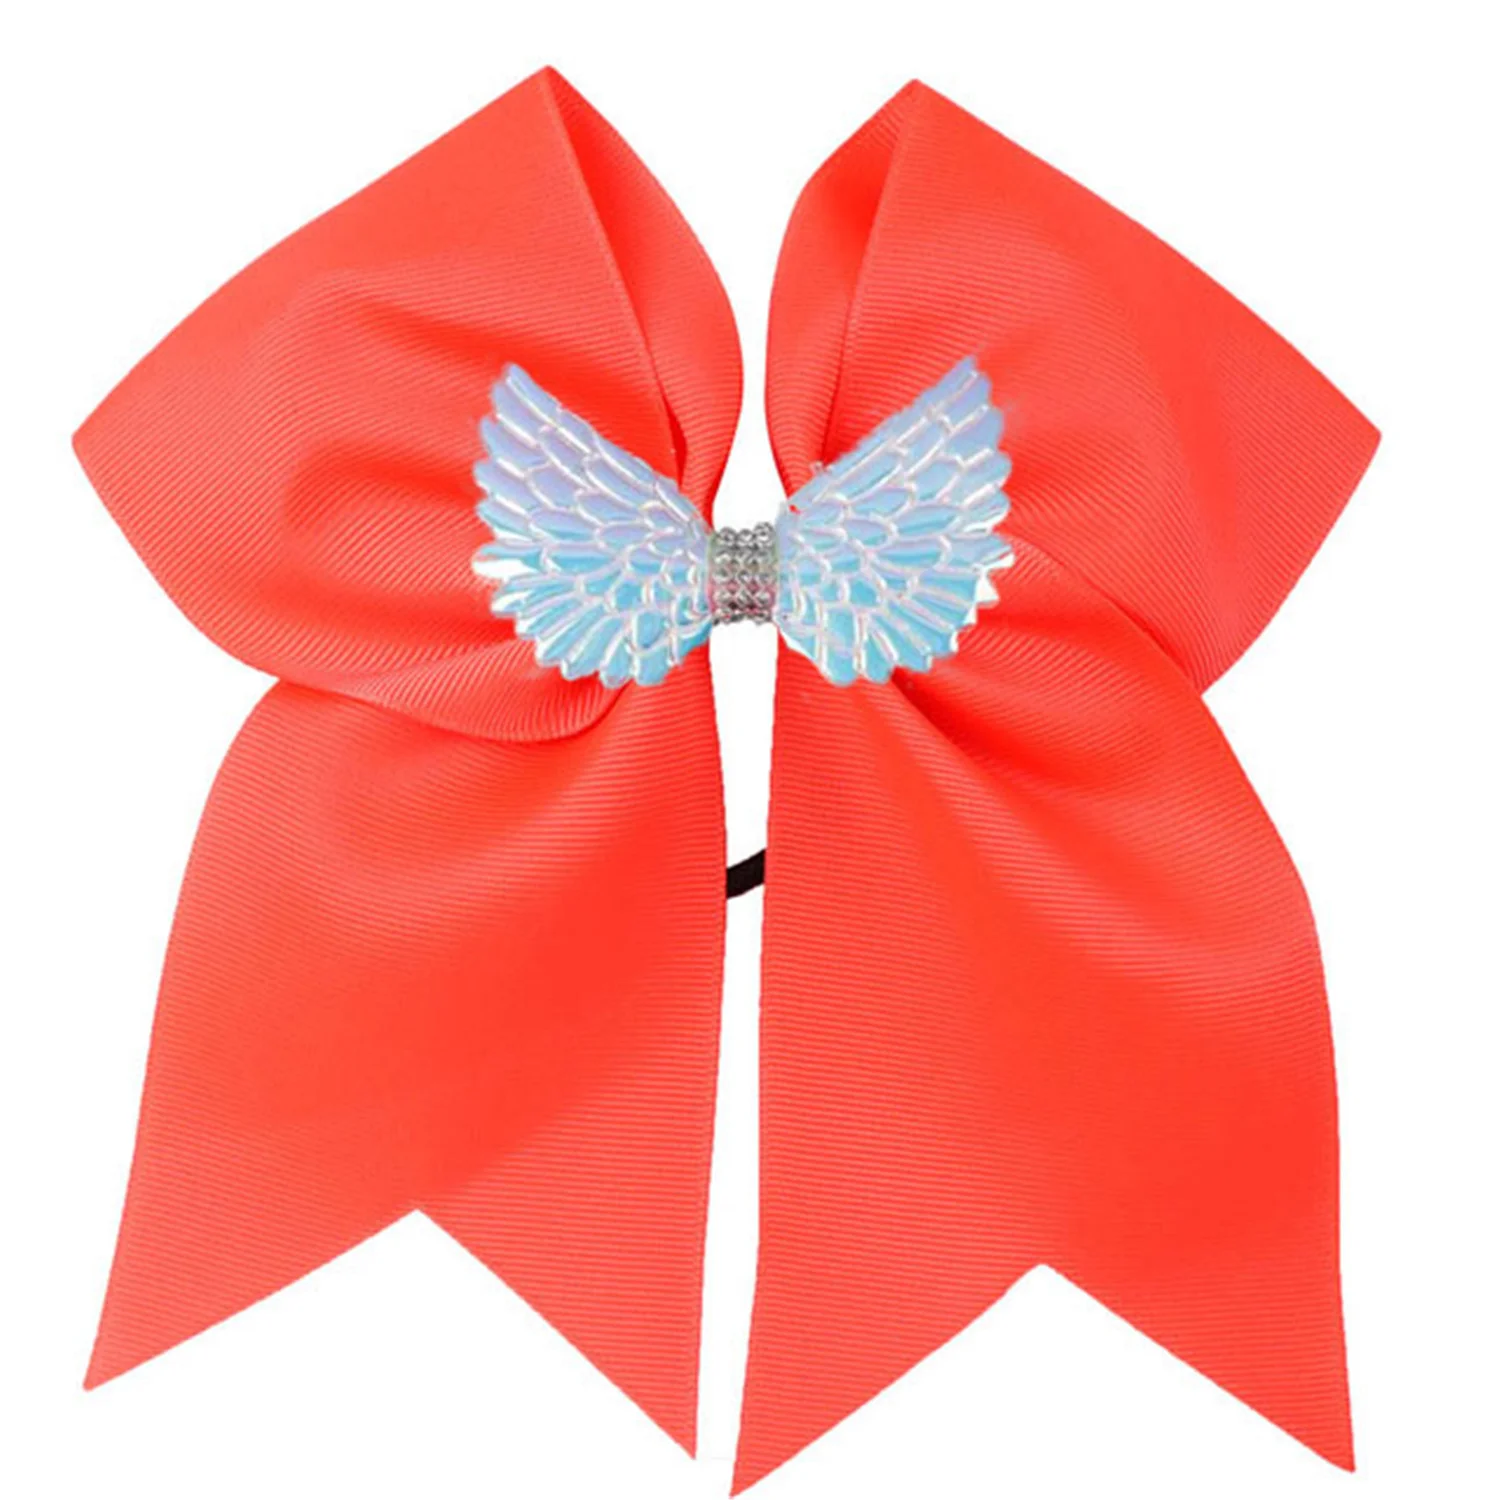 NEW 2pcs/ 7inch angel wings Hair Bow Girls Solid Cheer Bow With Elastic Band Cheerleader Hair Bands For Kids Hair Accessories